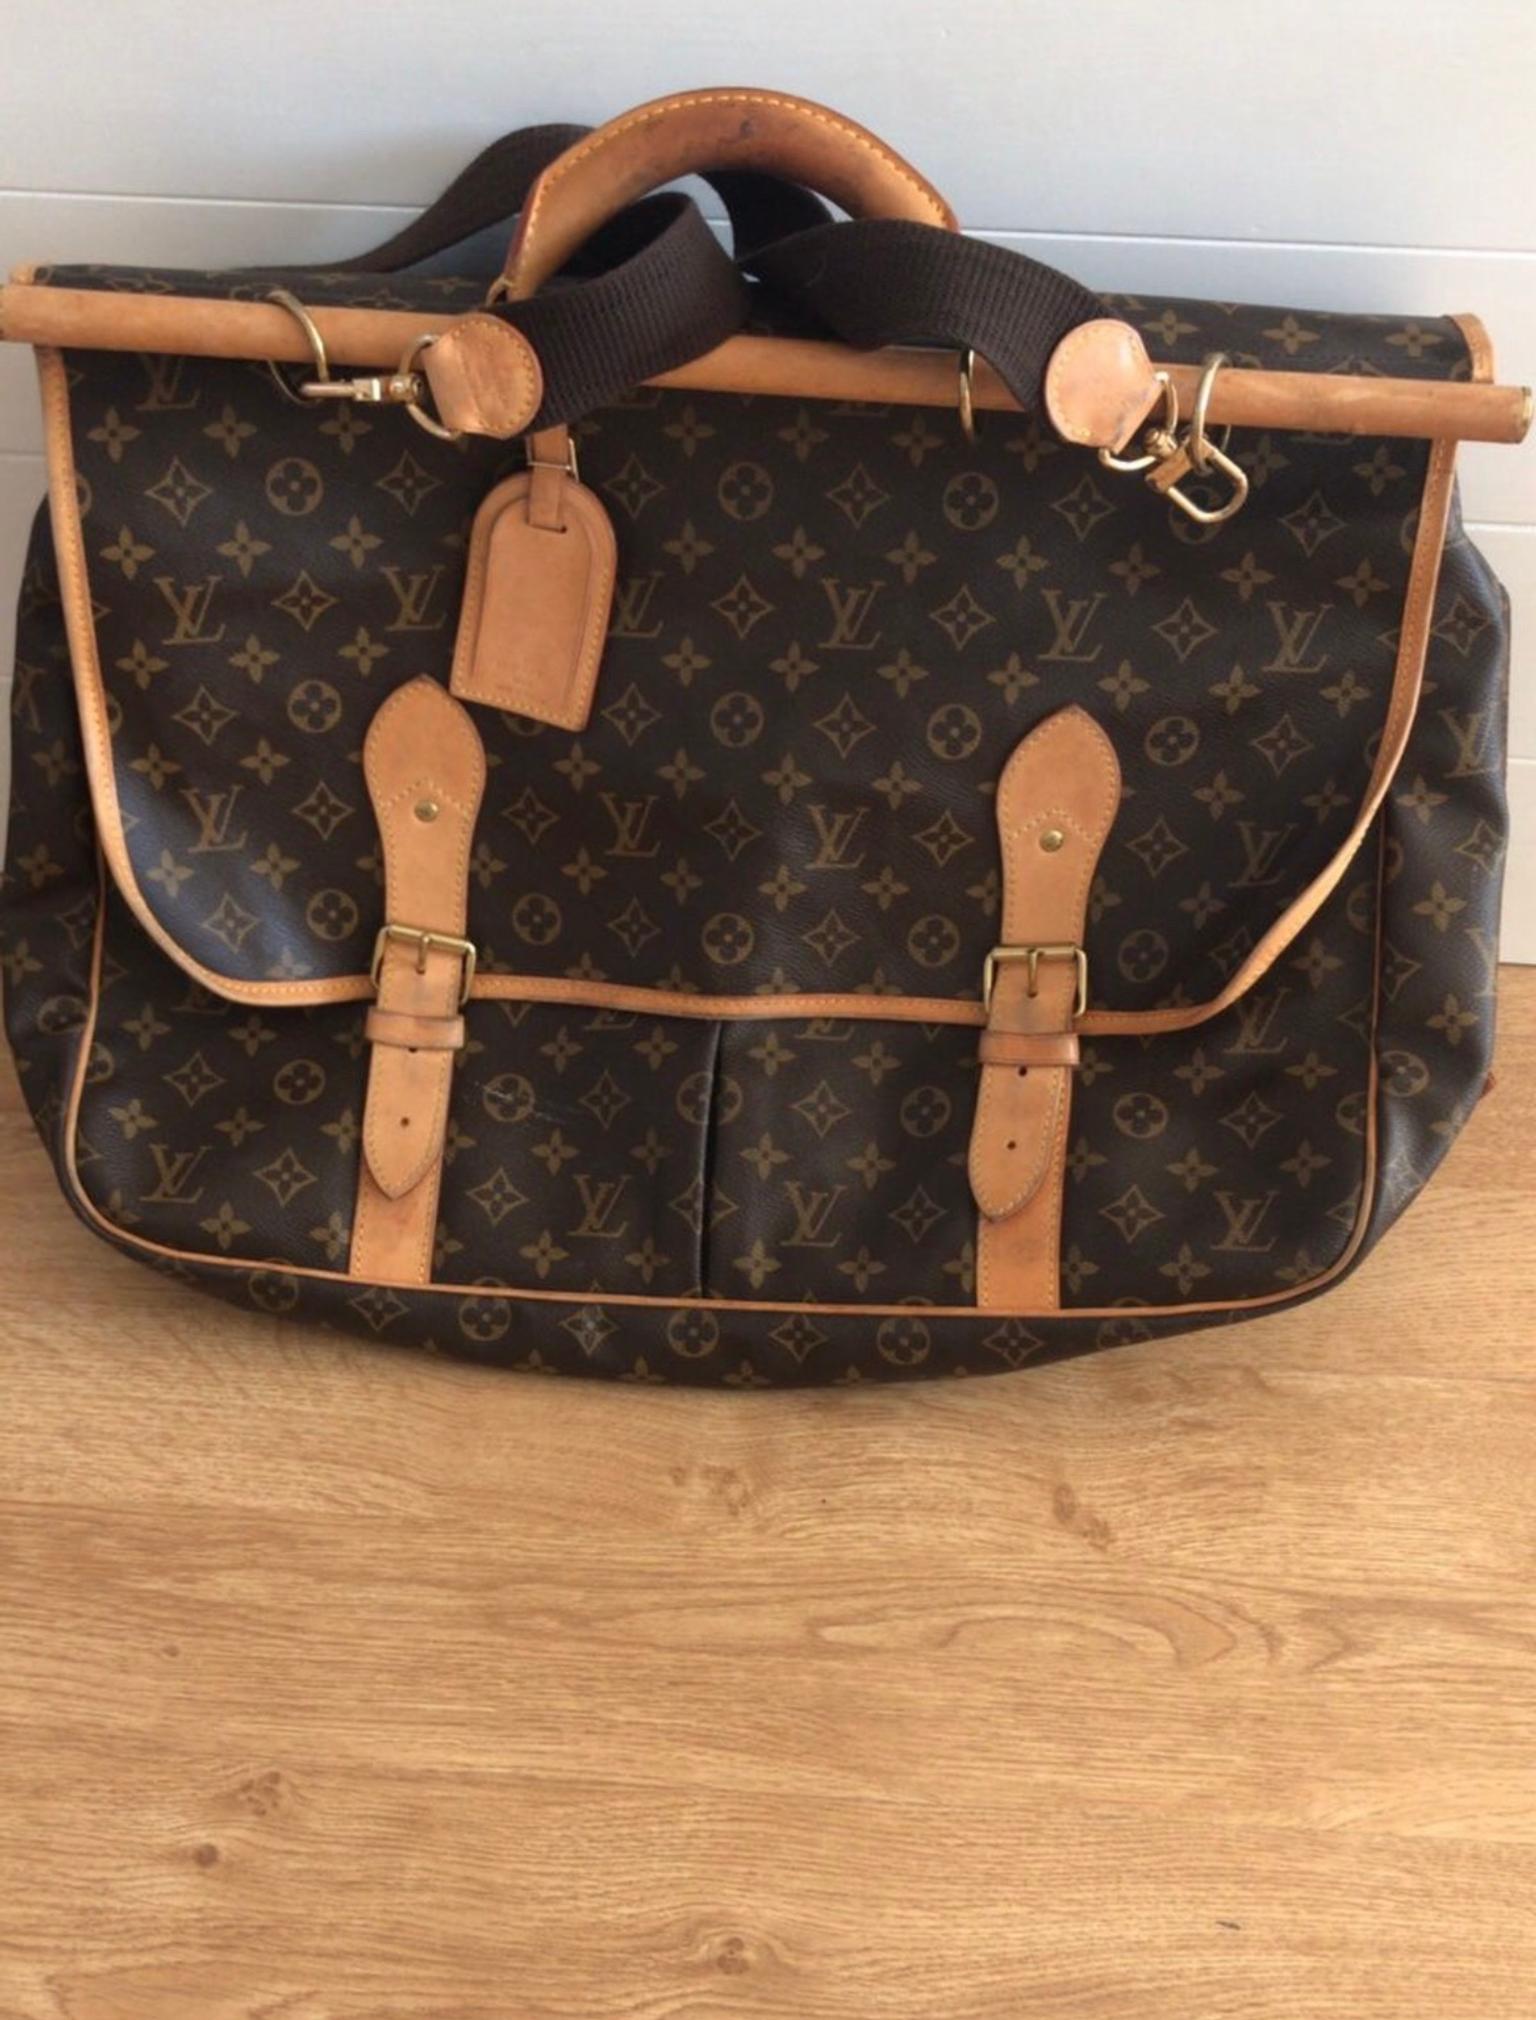 Vintage Louis Vuitton Sac Chasse Hunting Bag in SW13 Thames for £300.00 for sale | Shpock